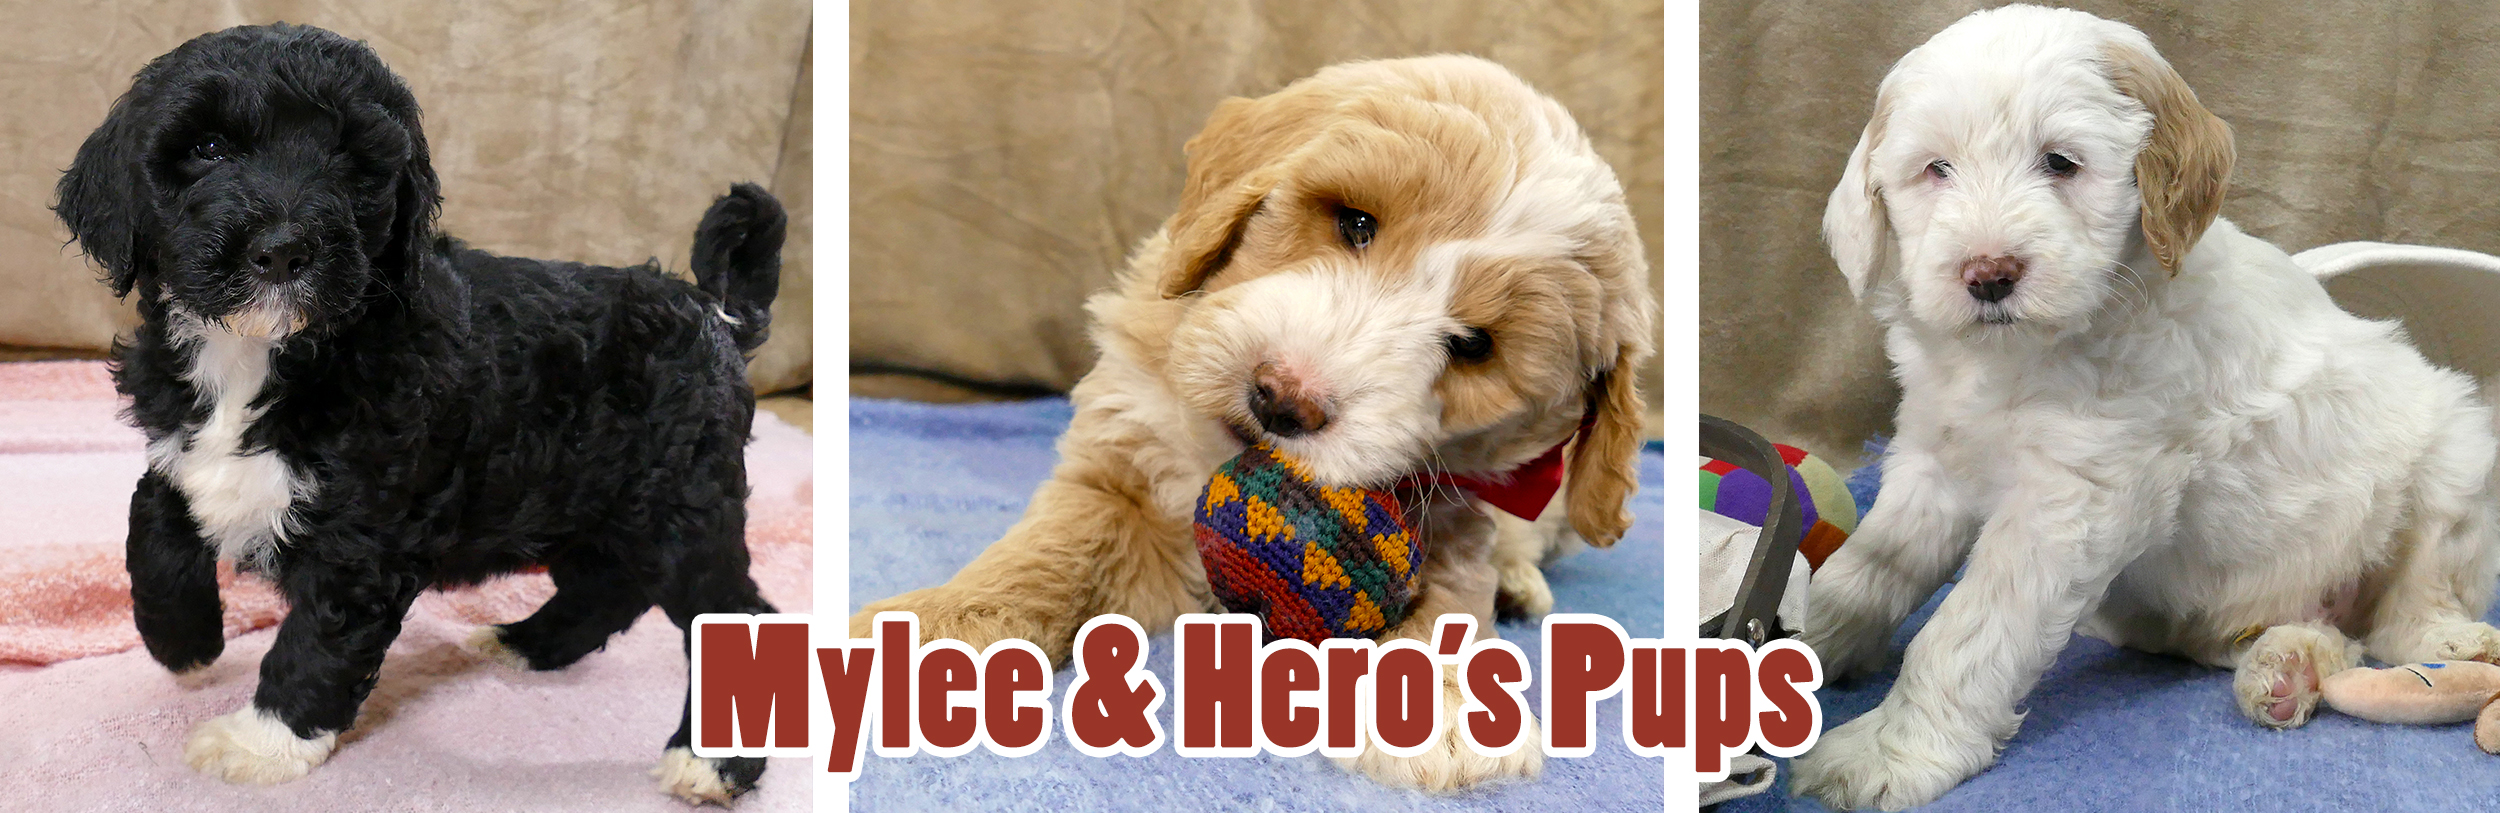 Three cute pictures of Mylee and Hero's puppies